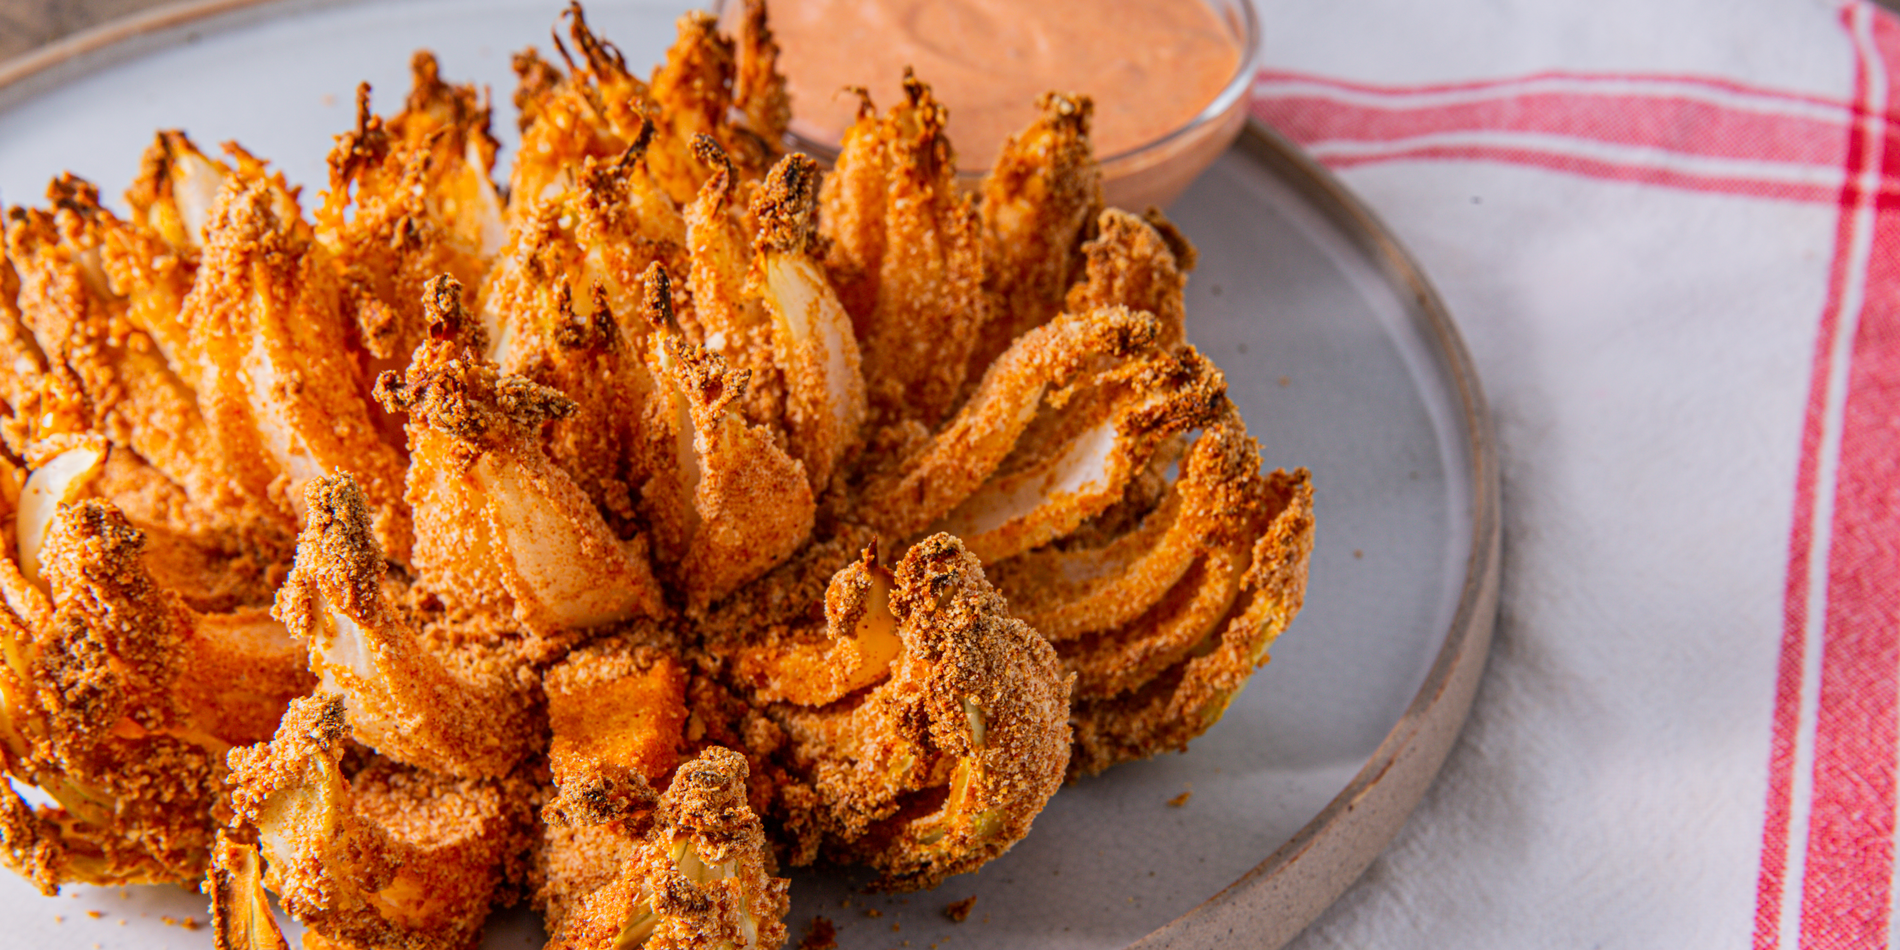 https://hips.hearstapps.com/hmg-prod/images/20190725-delish-air-fryer-bloomin-onion-ehg-horizontal-1565296163.png